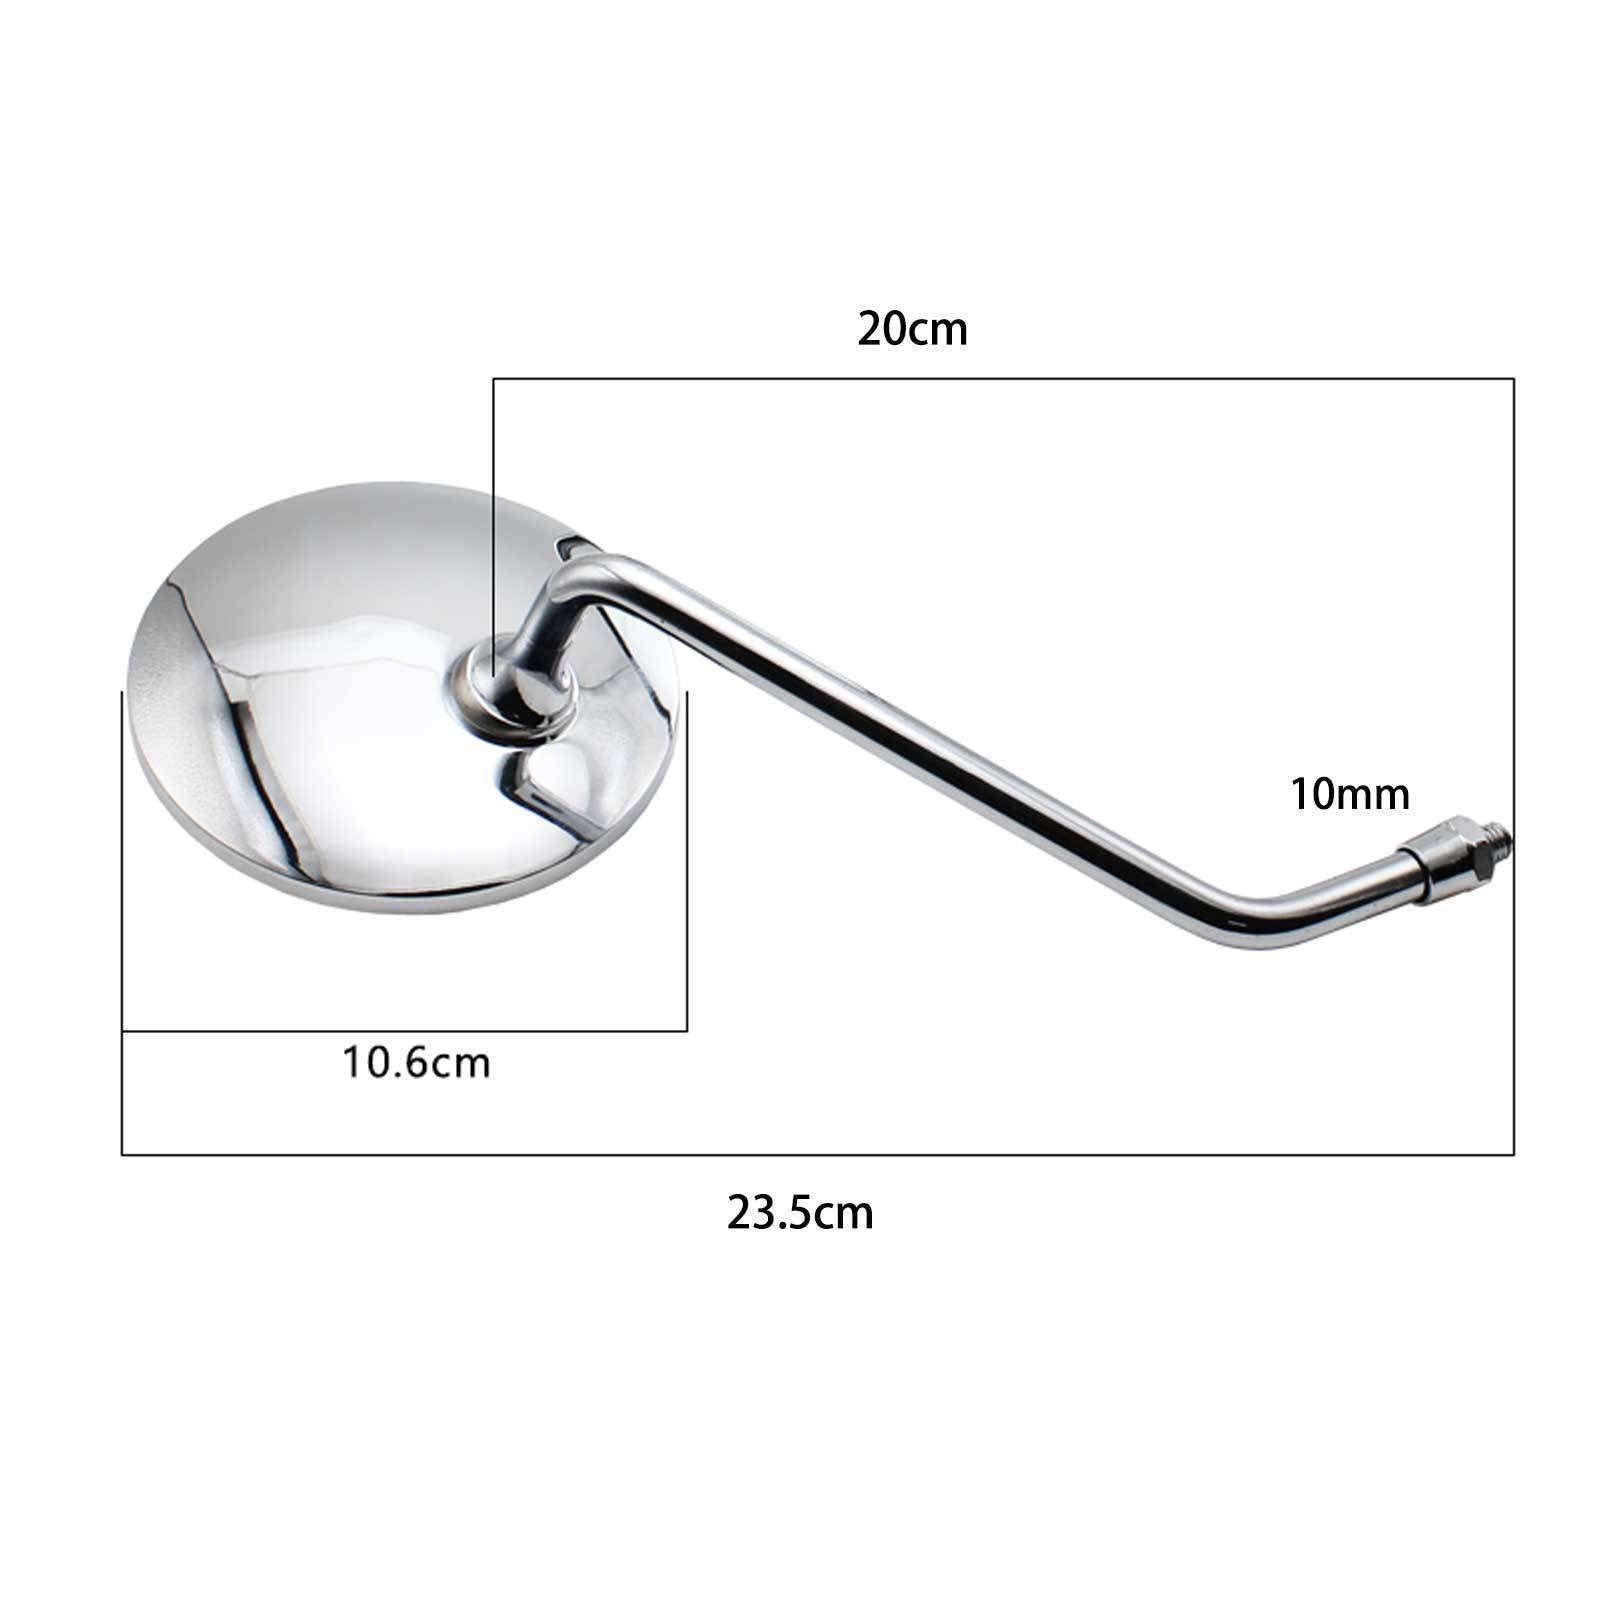 Pair Motorcycle Rear View Rearview Side Round Mirrors Universal 10mm Street Bike